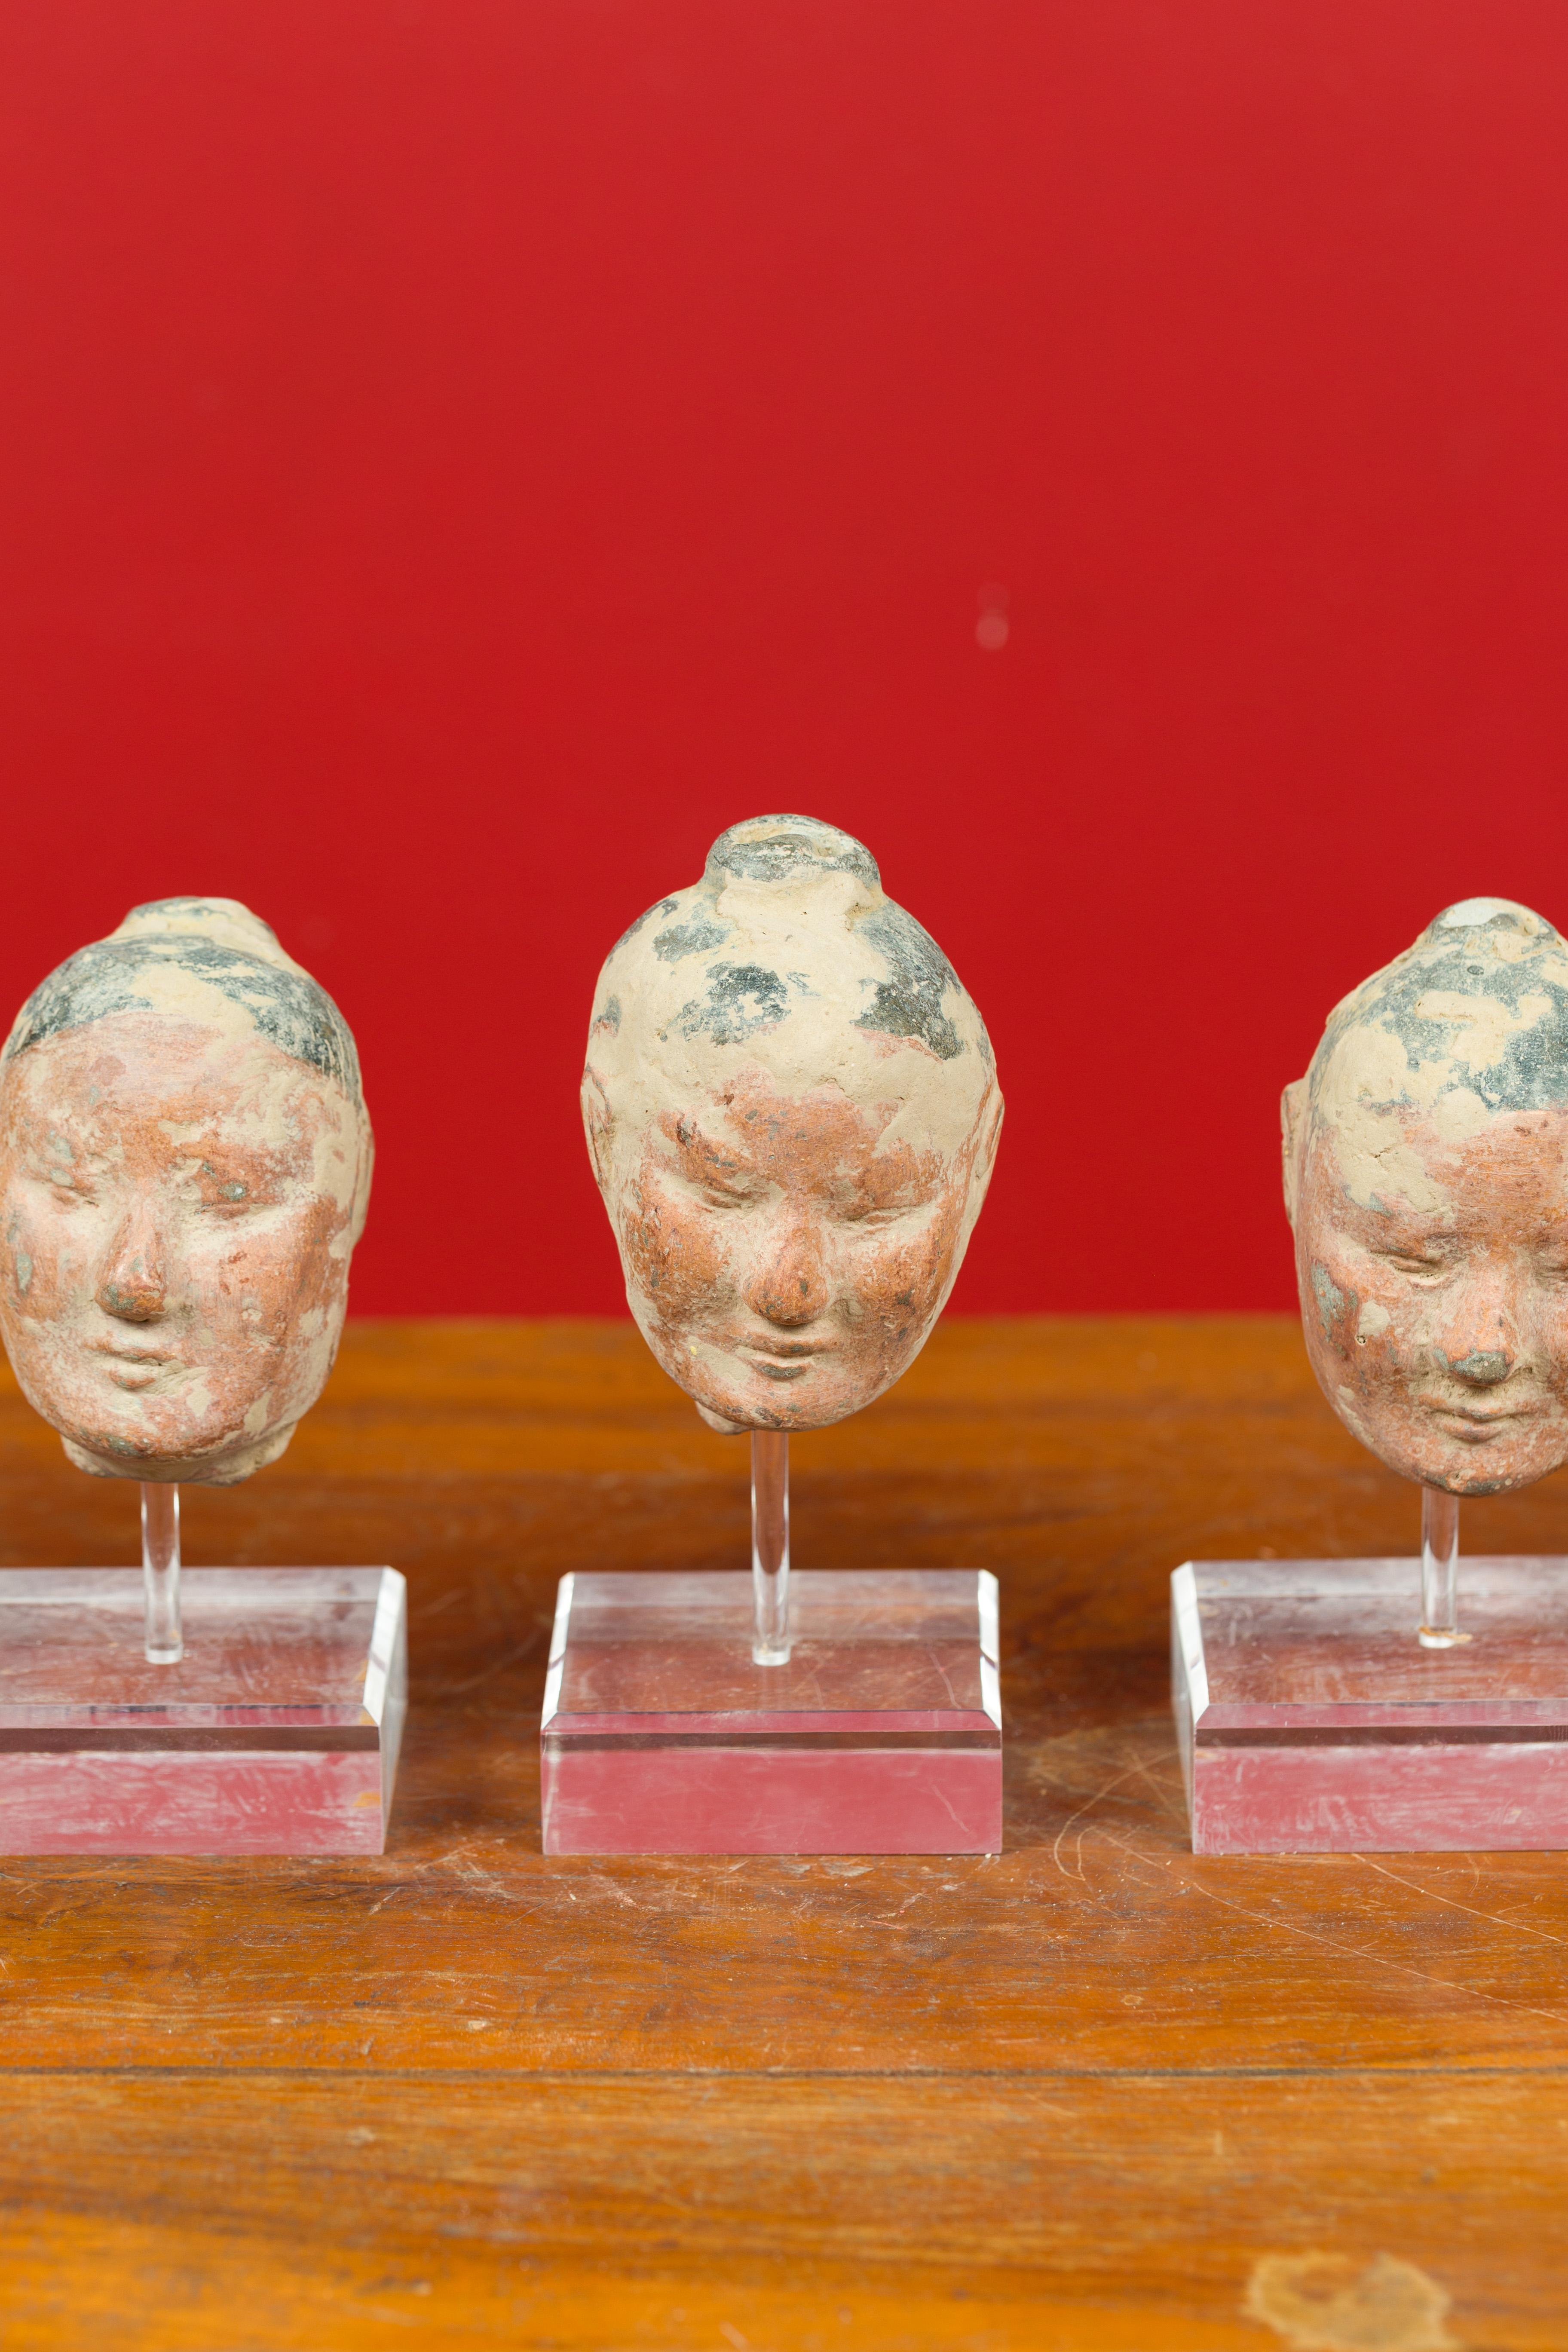 18th Century and Earlier Set of Five Chinese Han Dynasty Terracotta Heads with Original Paint on Lucite